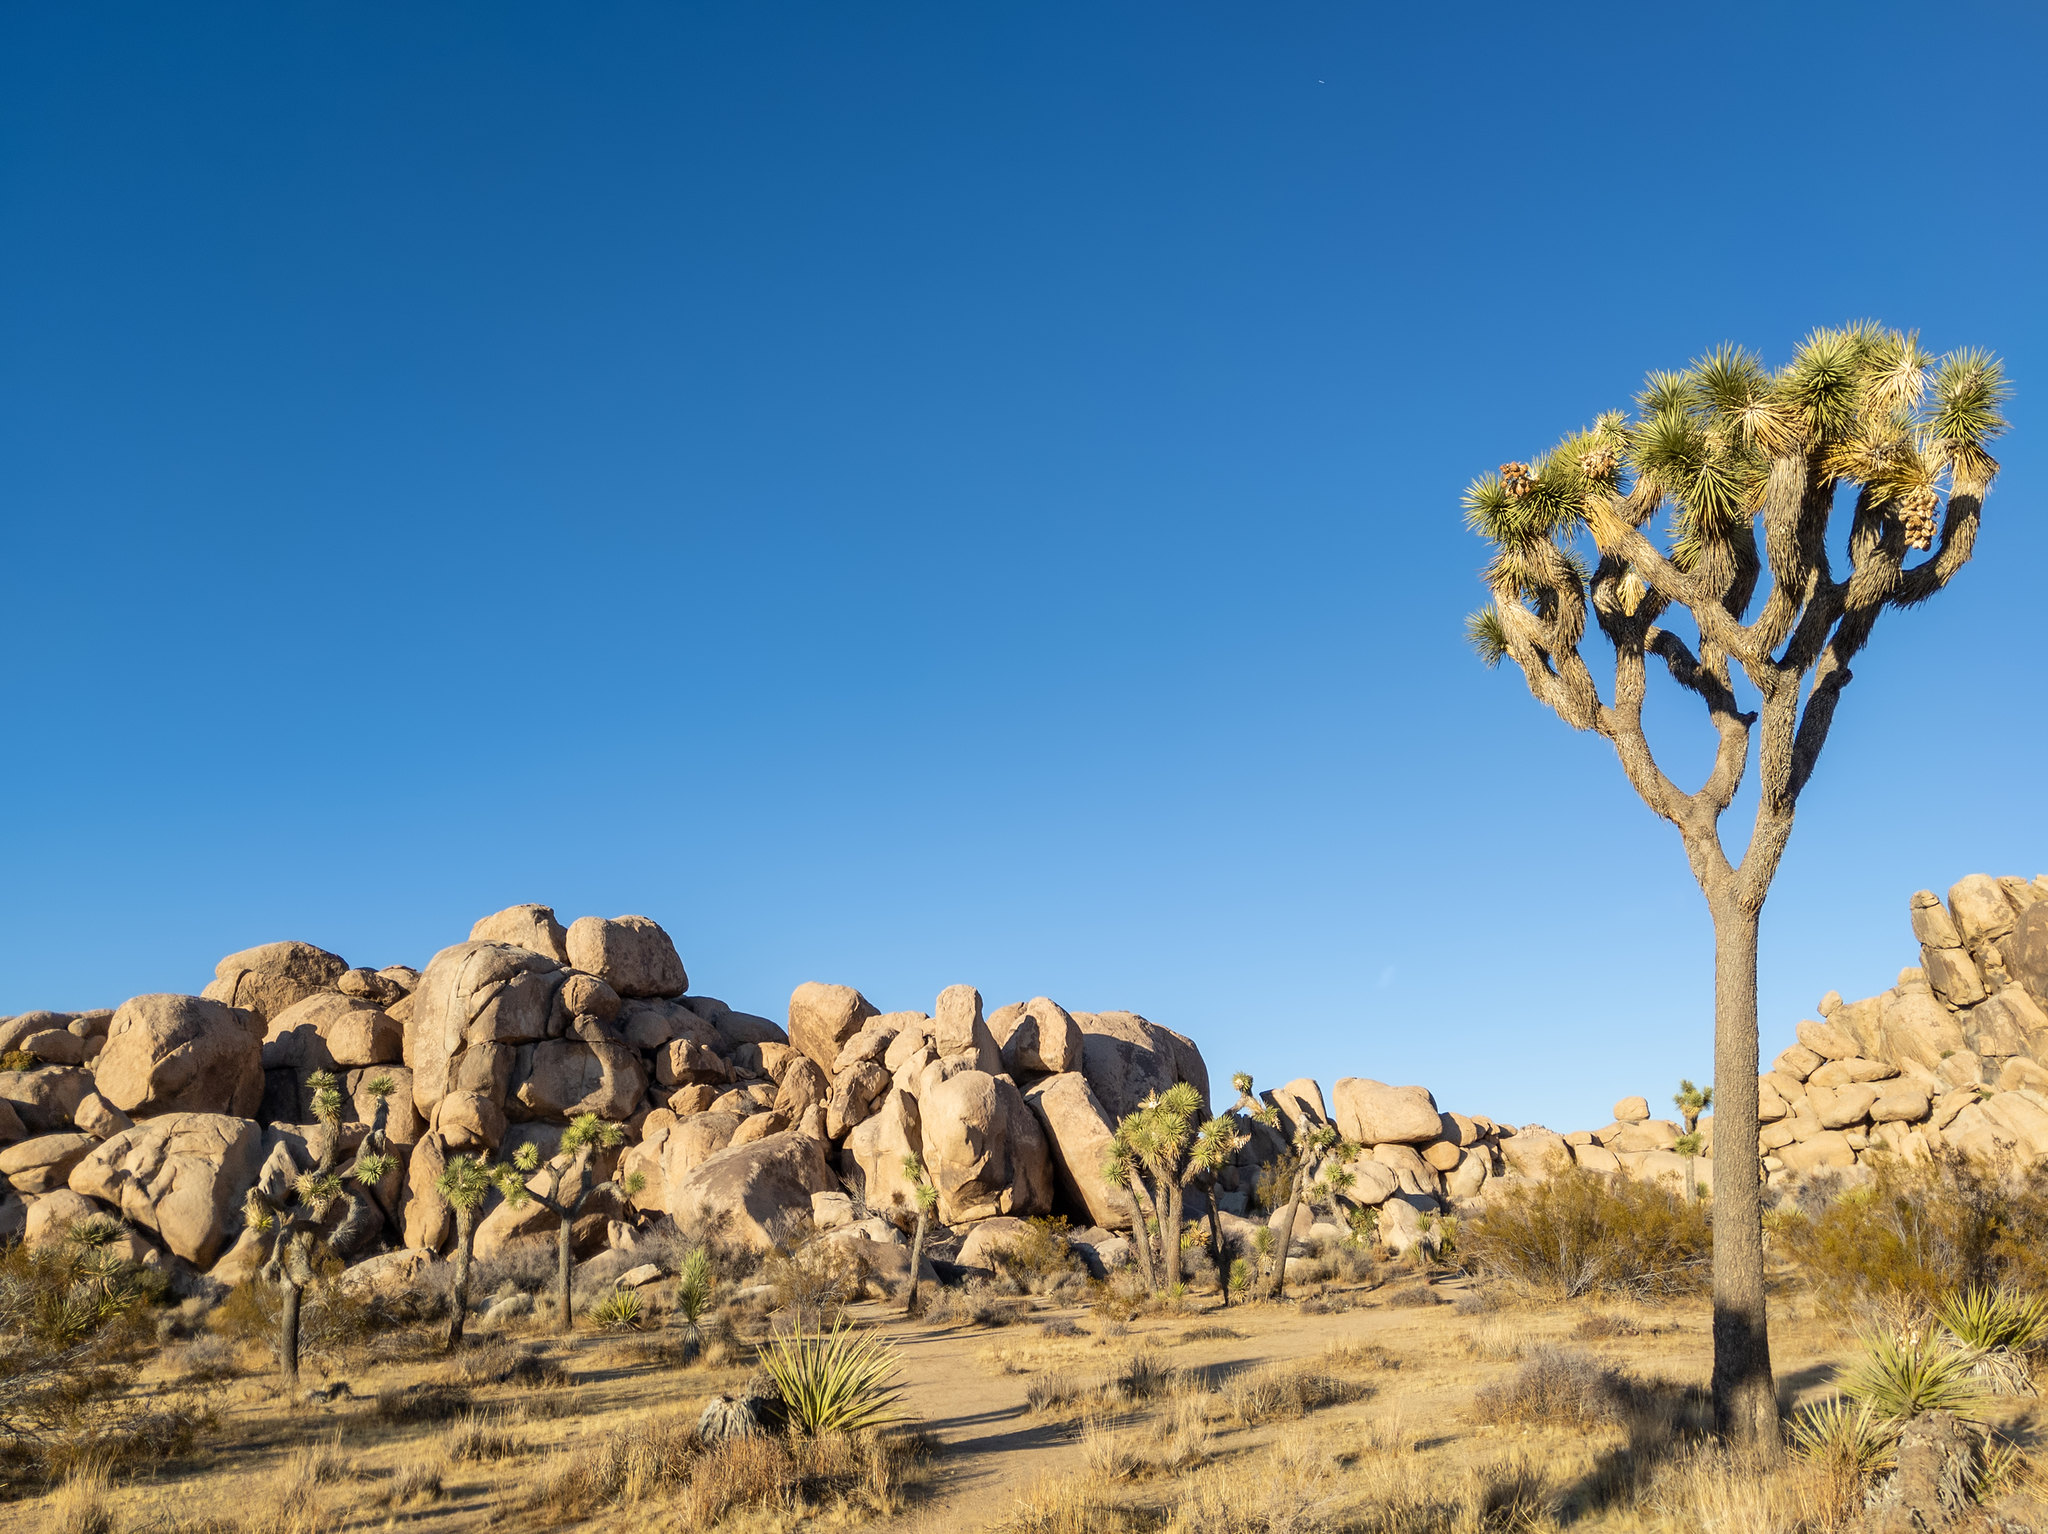 A Joshua tree sits in the blazing desert sun next to a pile of ancient rocks.